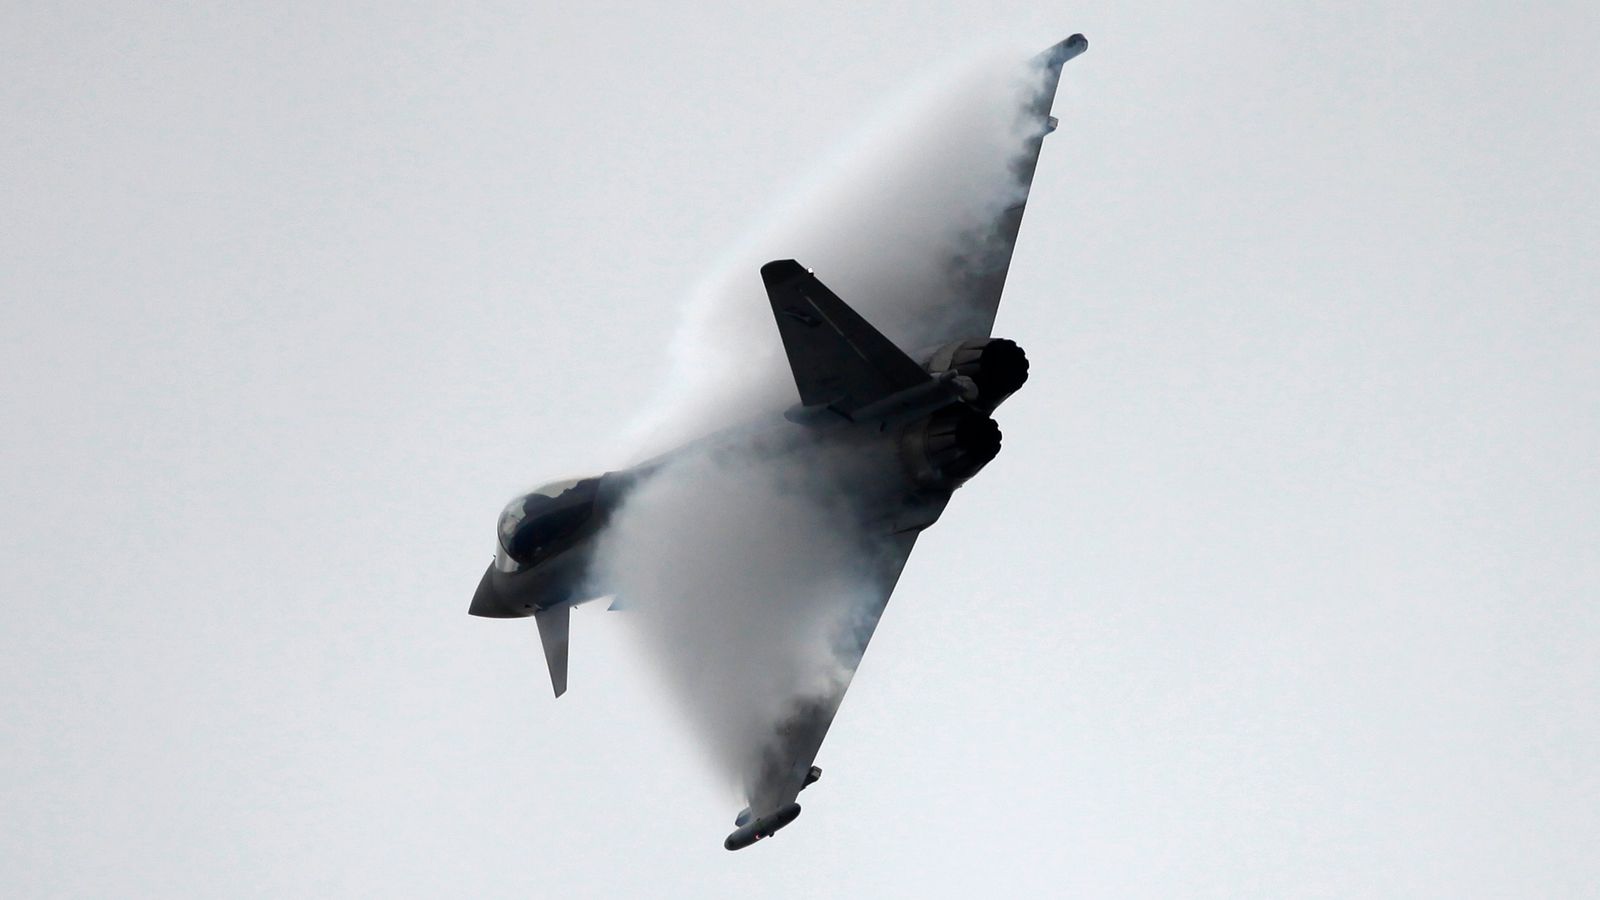 What was the sonic boom heard across central England?